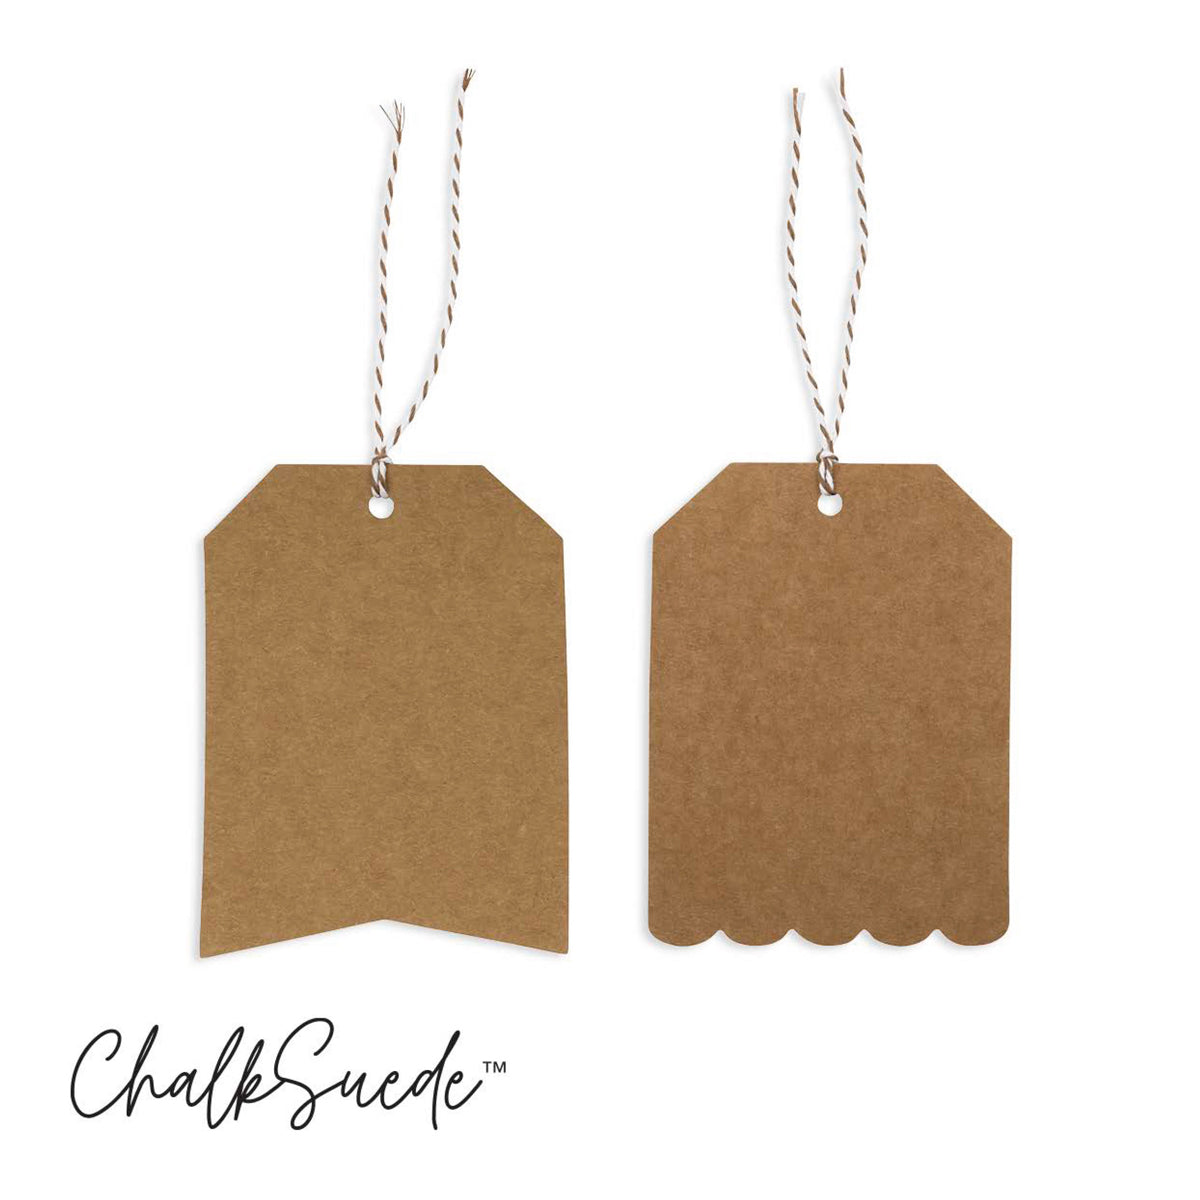 ChalkSuede™ Gift Tags (12-Pack, 3" x 4")